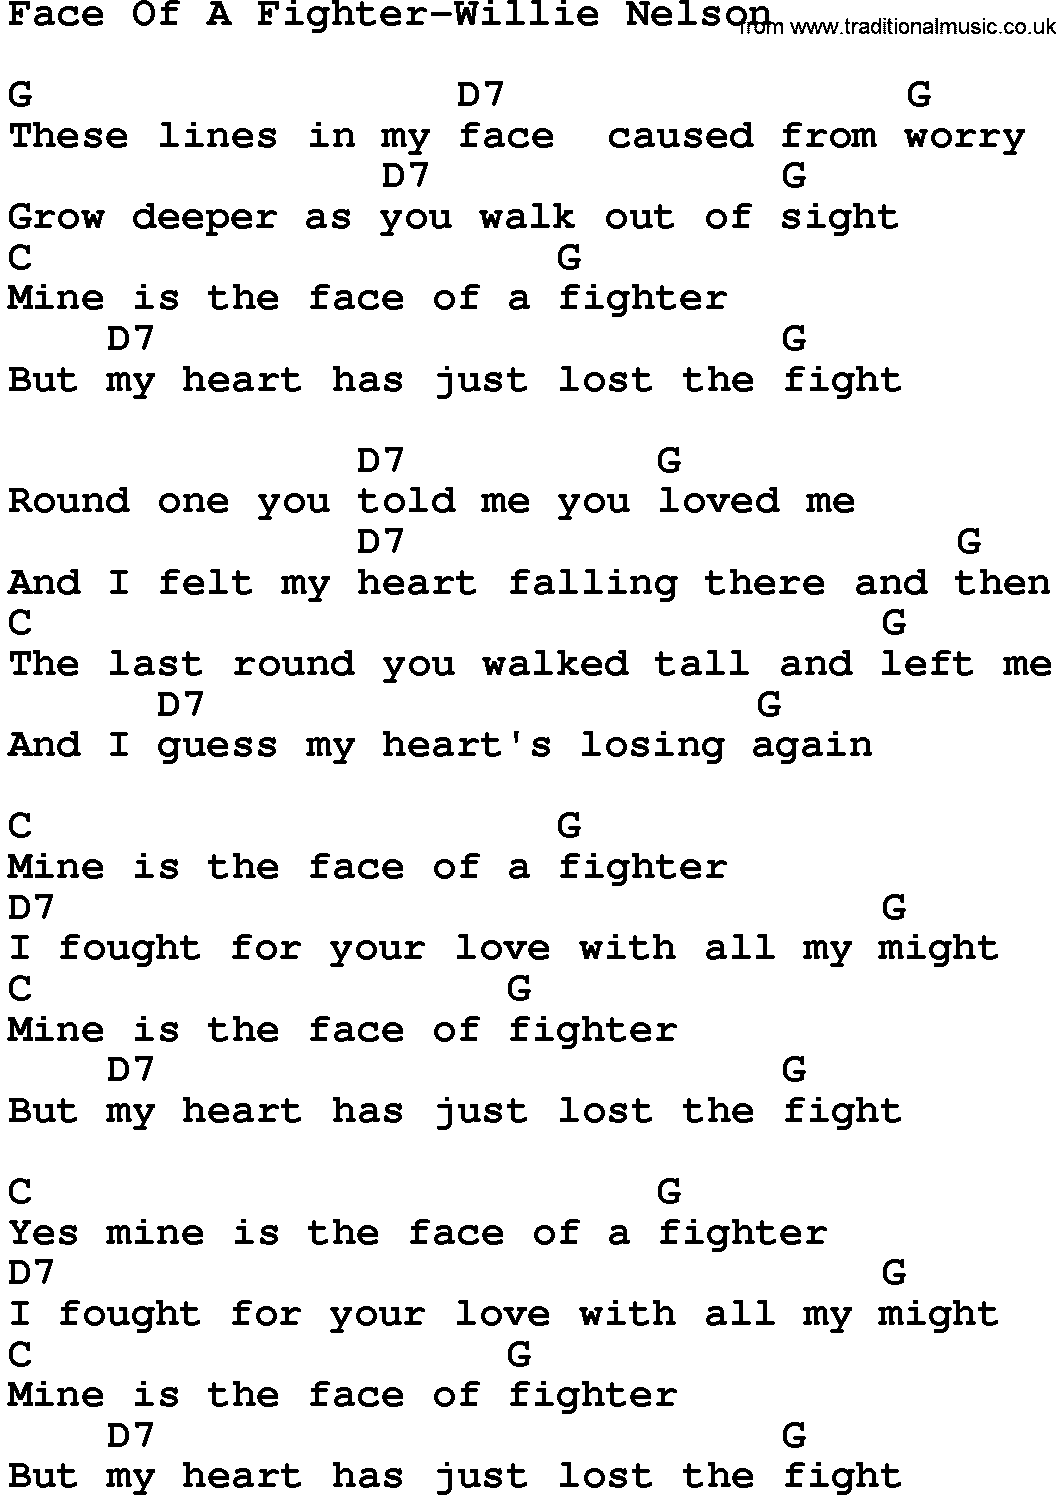 Country music song: Face Of A Fighter-Willie Nelson lyrics and chords